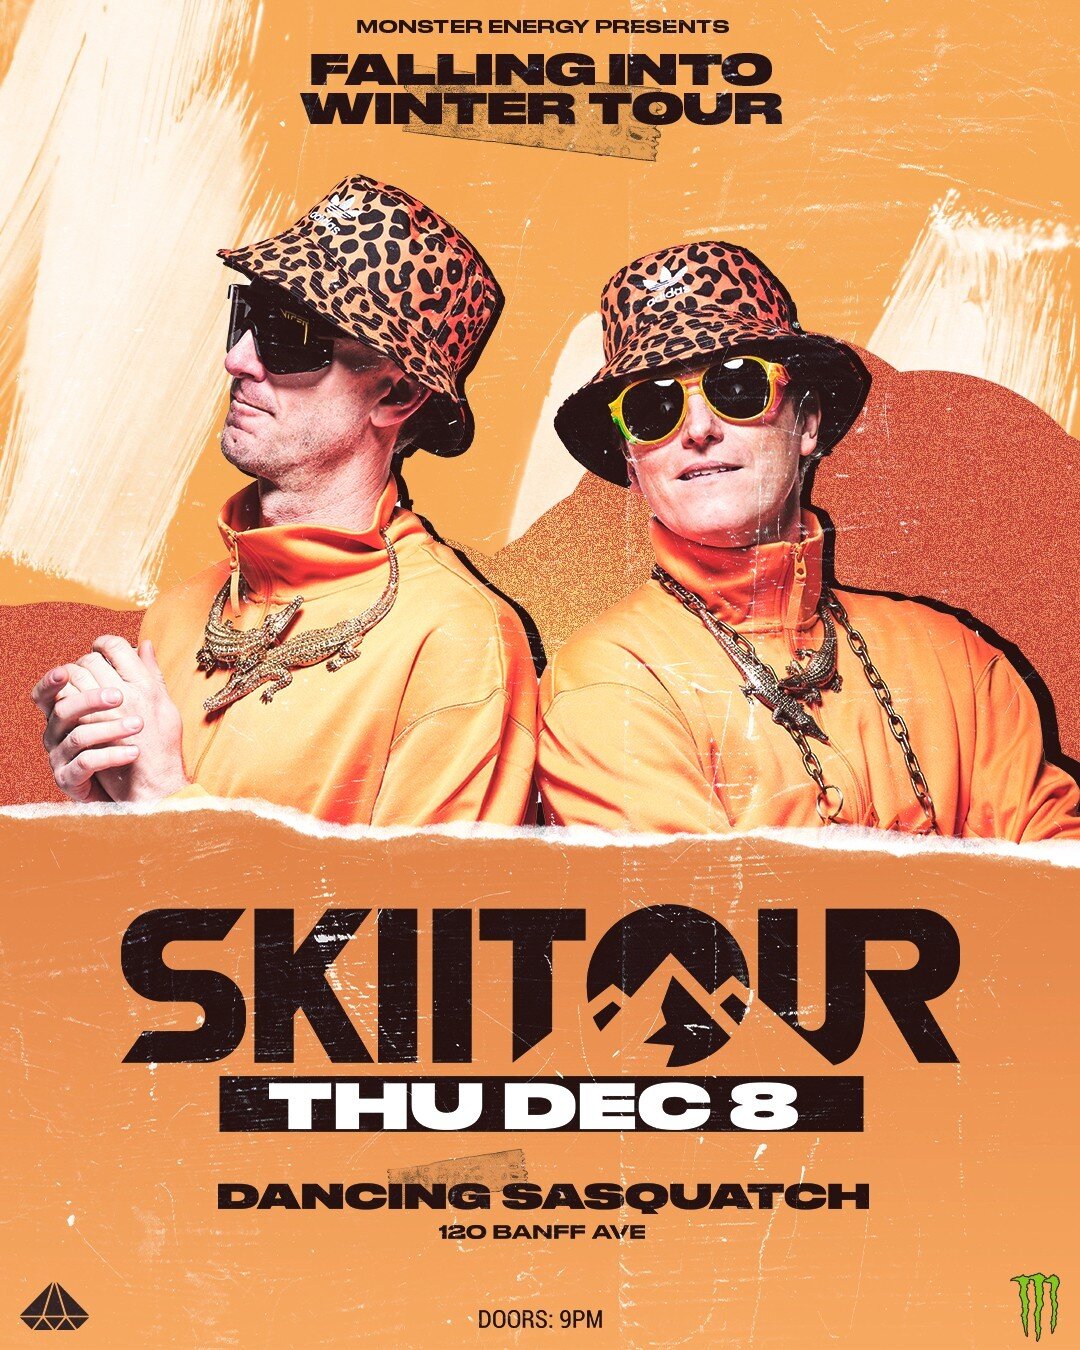 The boys are back Dec 8th to ring in the new season! 🕺🏻 Don&rsquo;t miss @skiitour at the Sasquatch! Tickets are officially on sale now on Showpass. #Skiitour #DancingSasquatch #Sasquatch #banff #mybanff